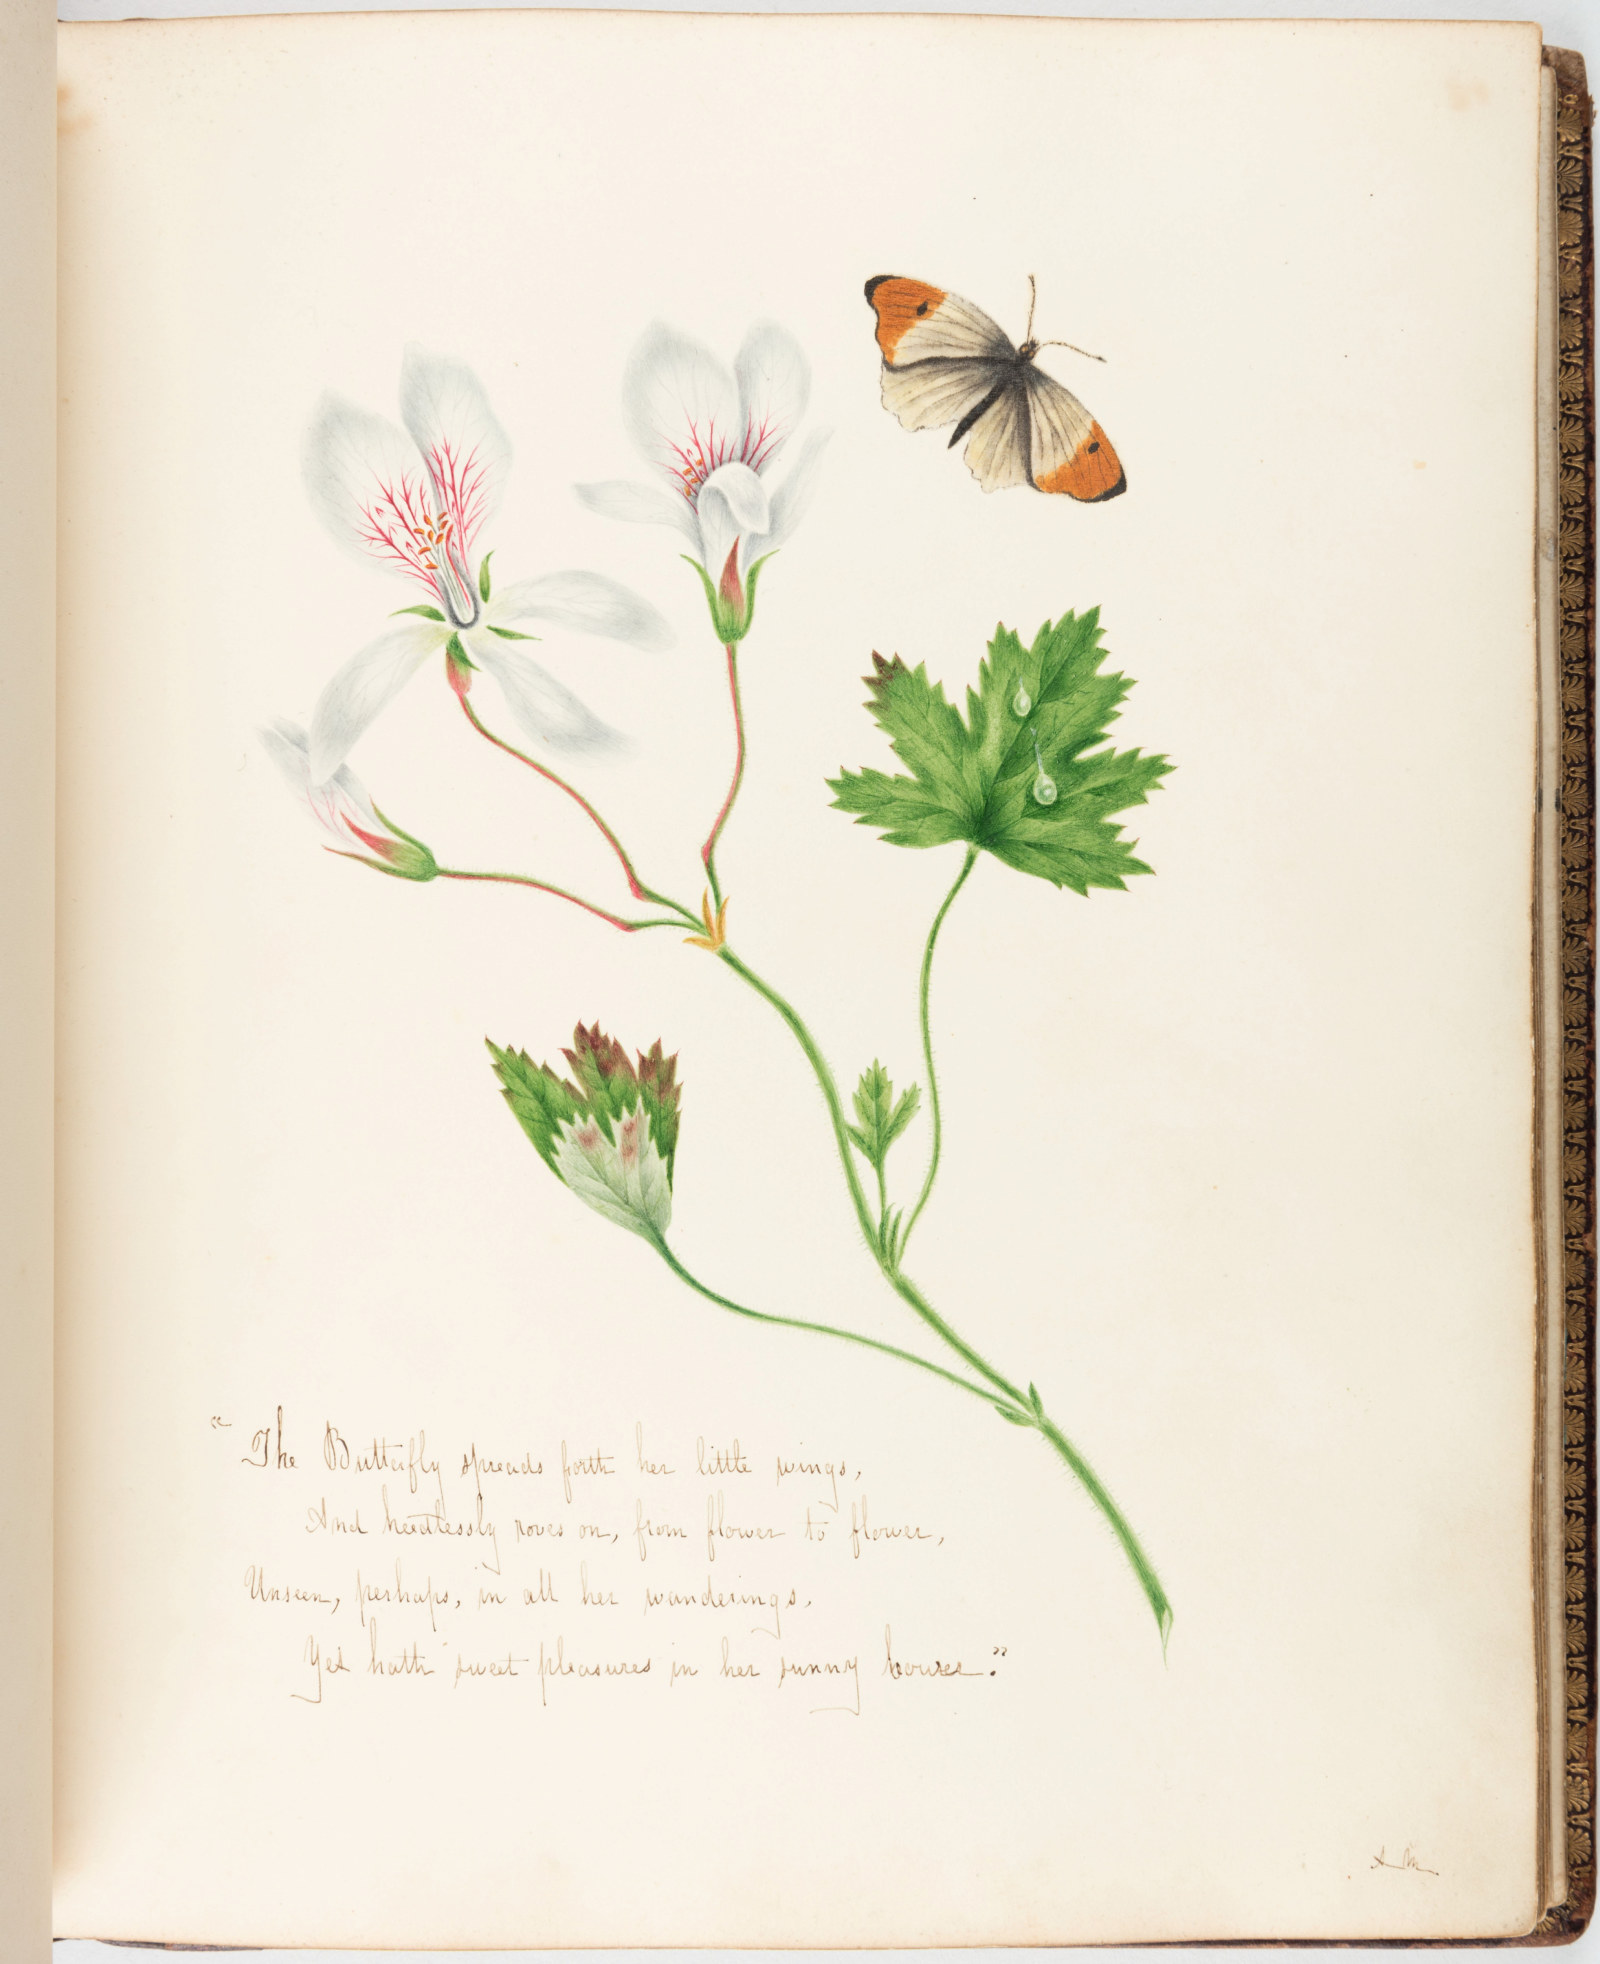 Botanical illustration with butterfly